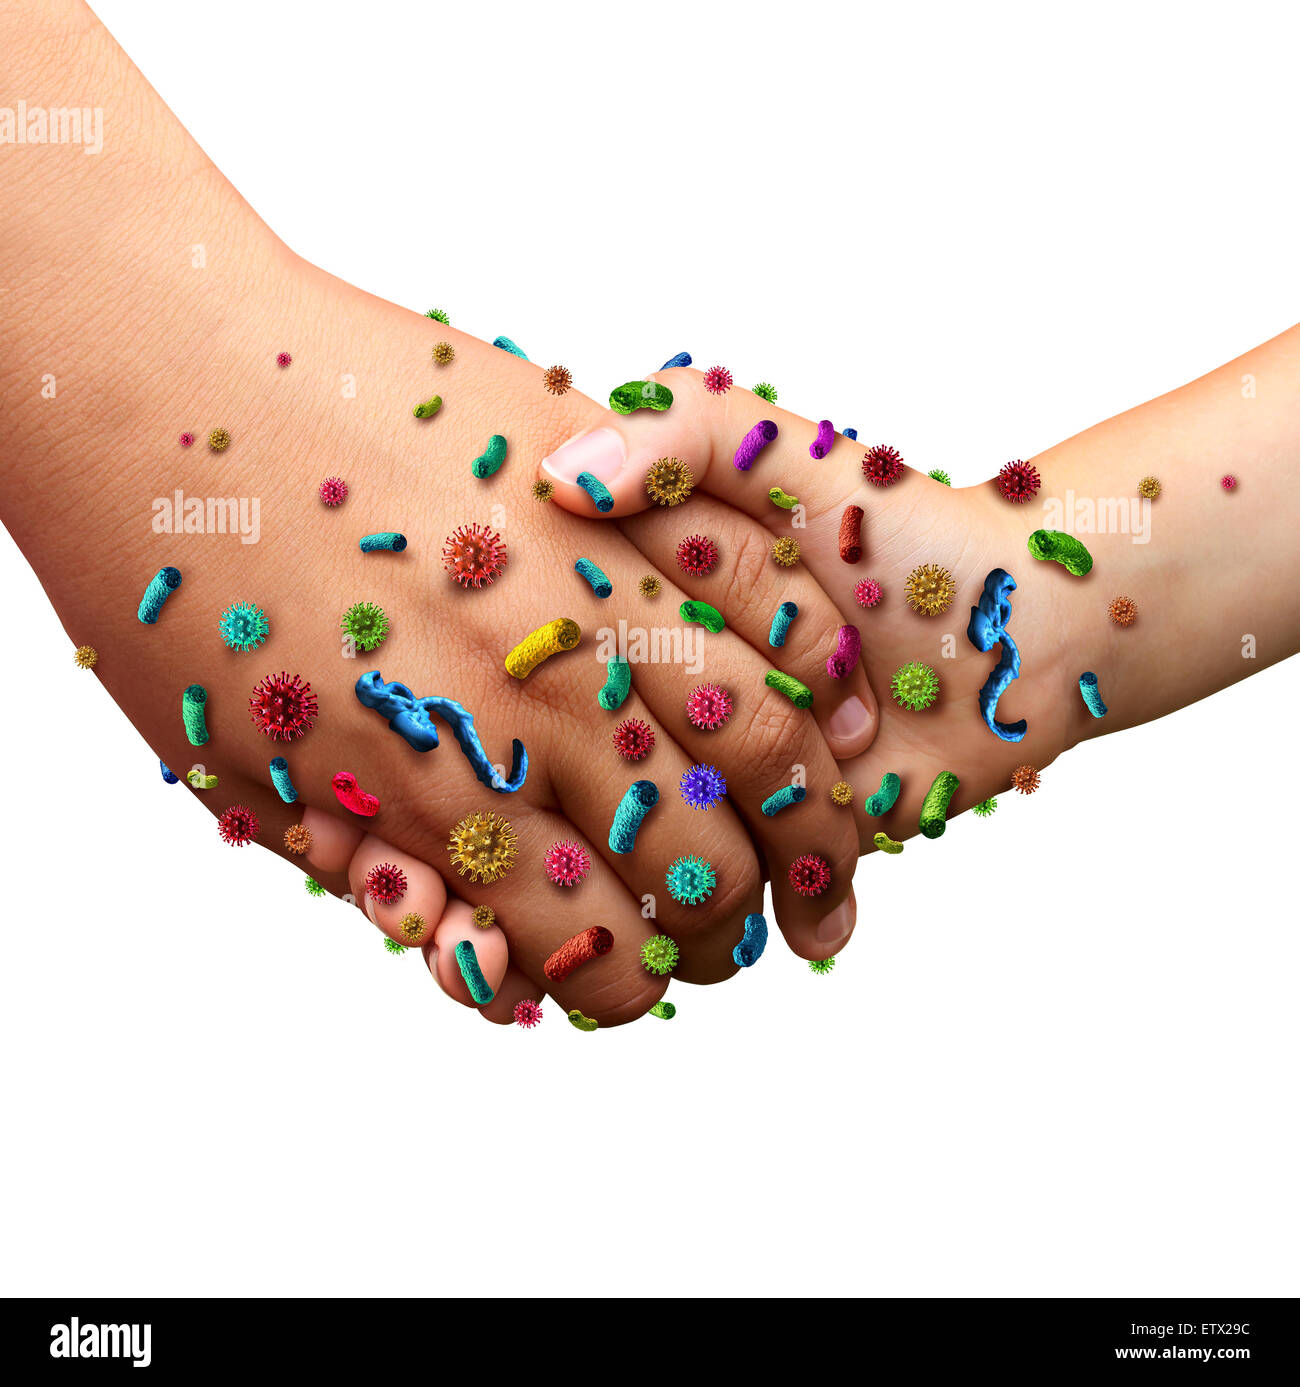 Infectious diseases spread hygiene concept as people holding hands with germ virus and bacteria spreading with illness in public as a health care risk concept to not wash your hands as dirty infected fingers and palm  with contagious pathogens. Stock Photo